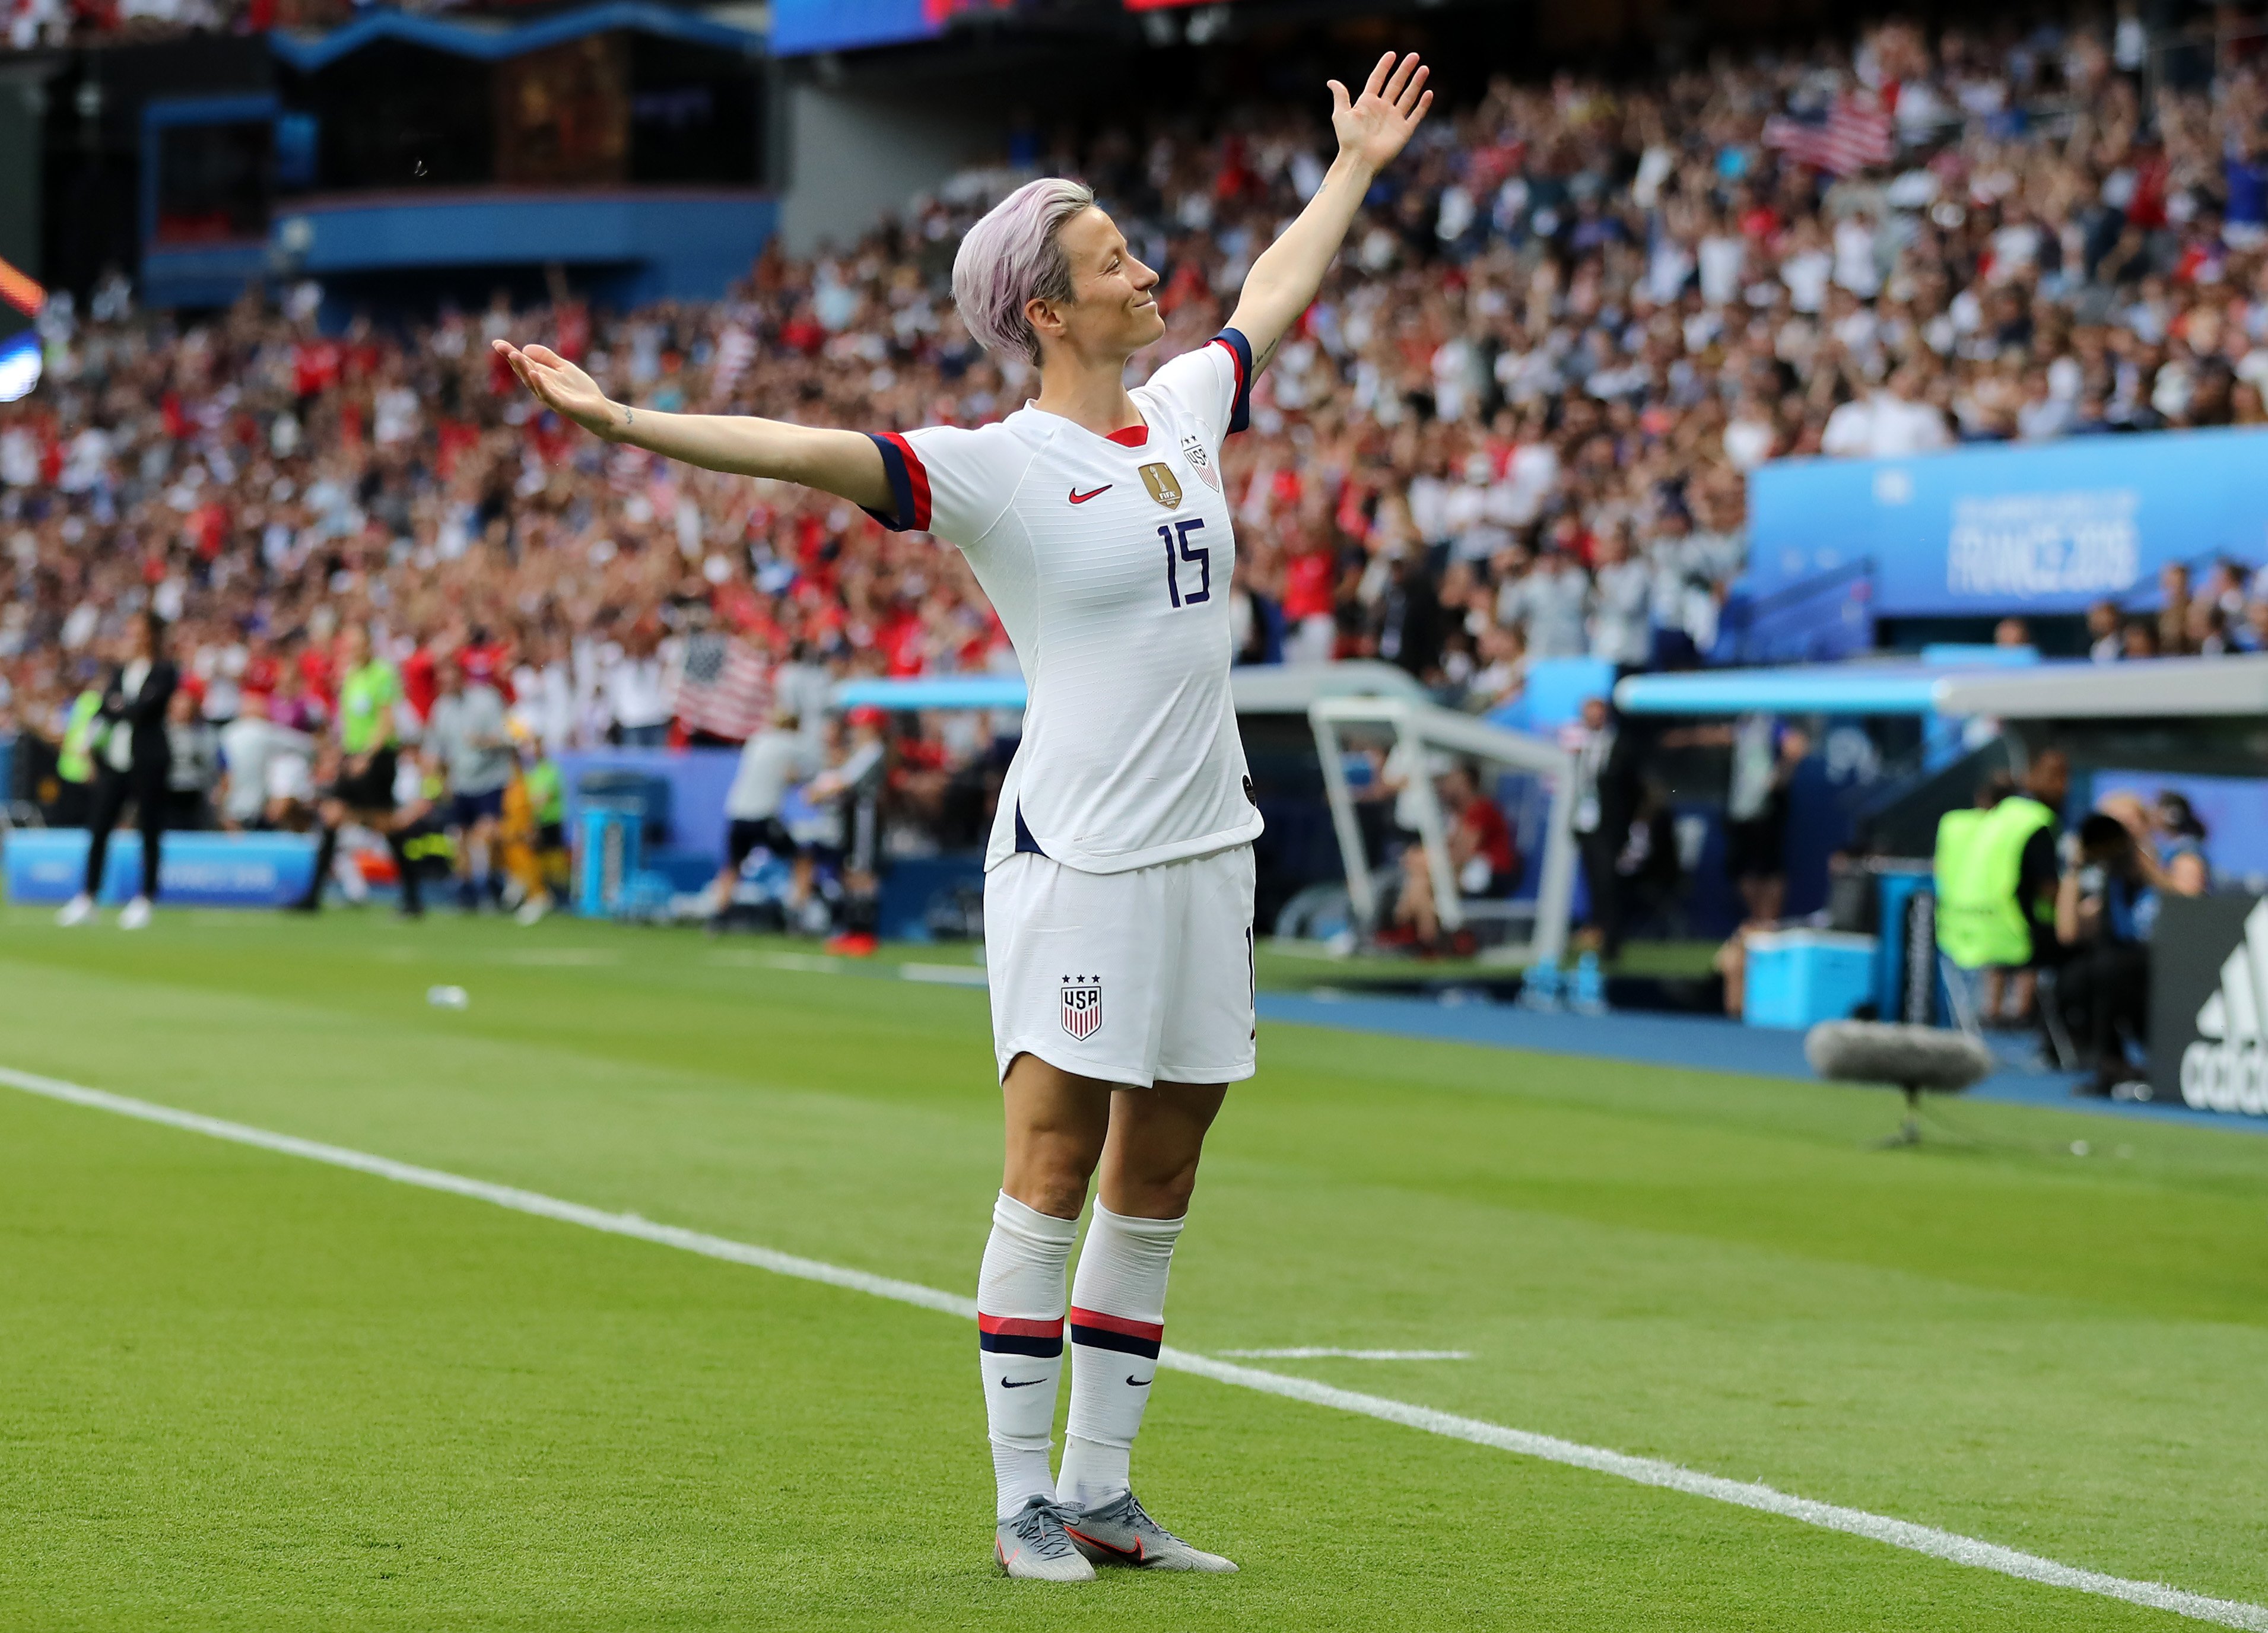 Megan Rapinoe celebrates a victory at the 2019 FIFA Women's World Cup | Photo: Getty Images